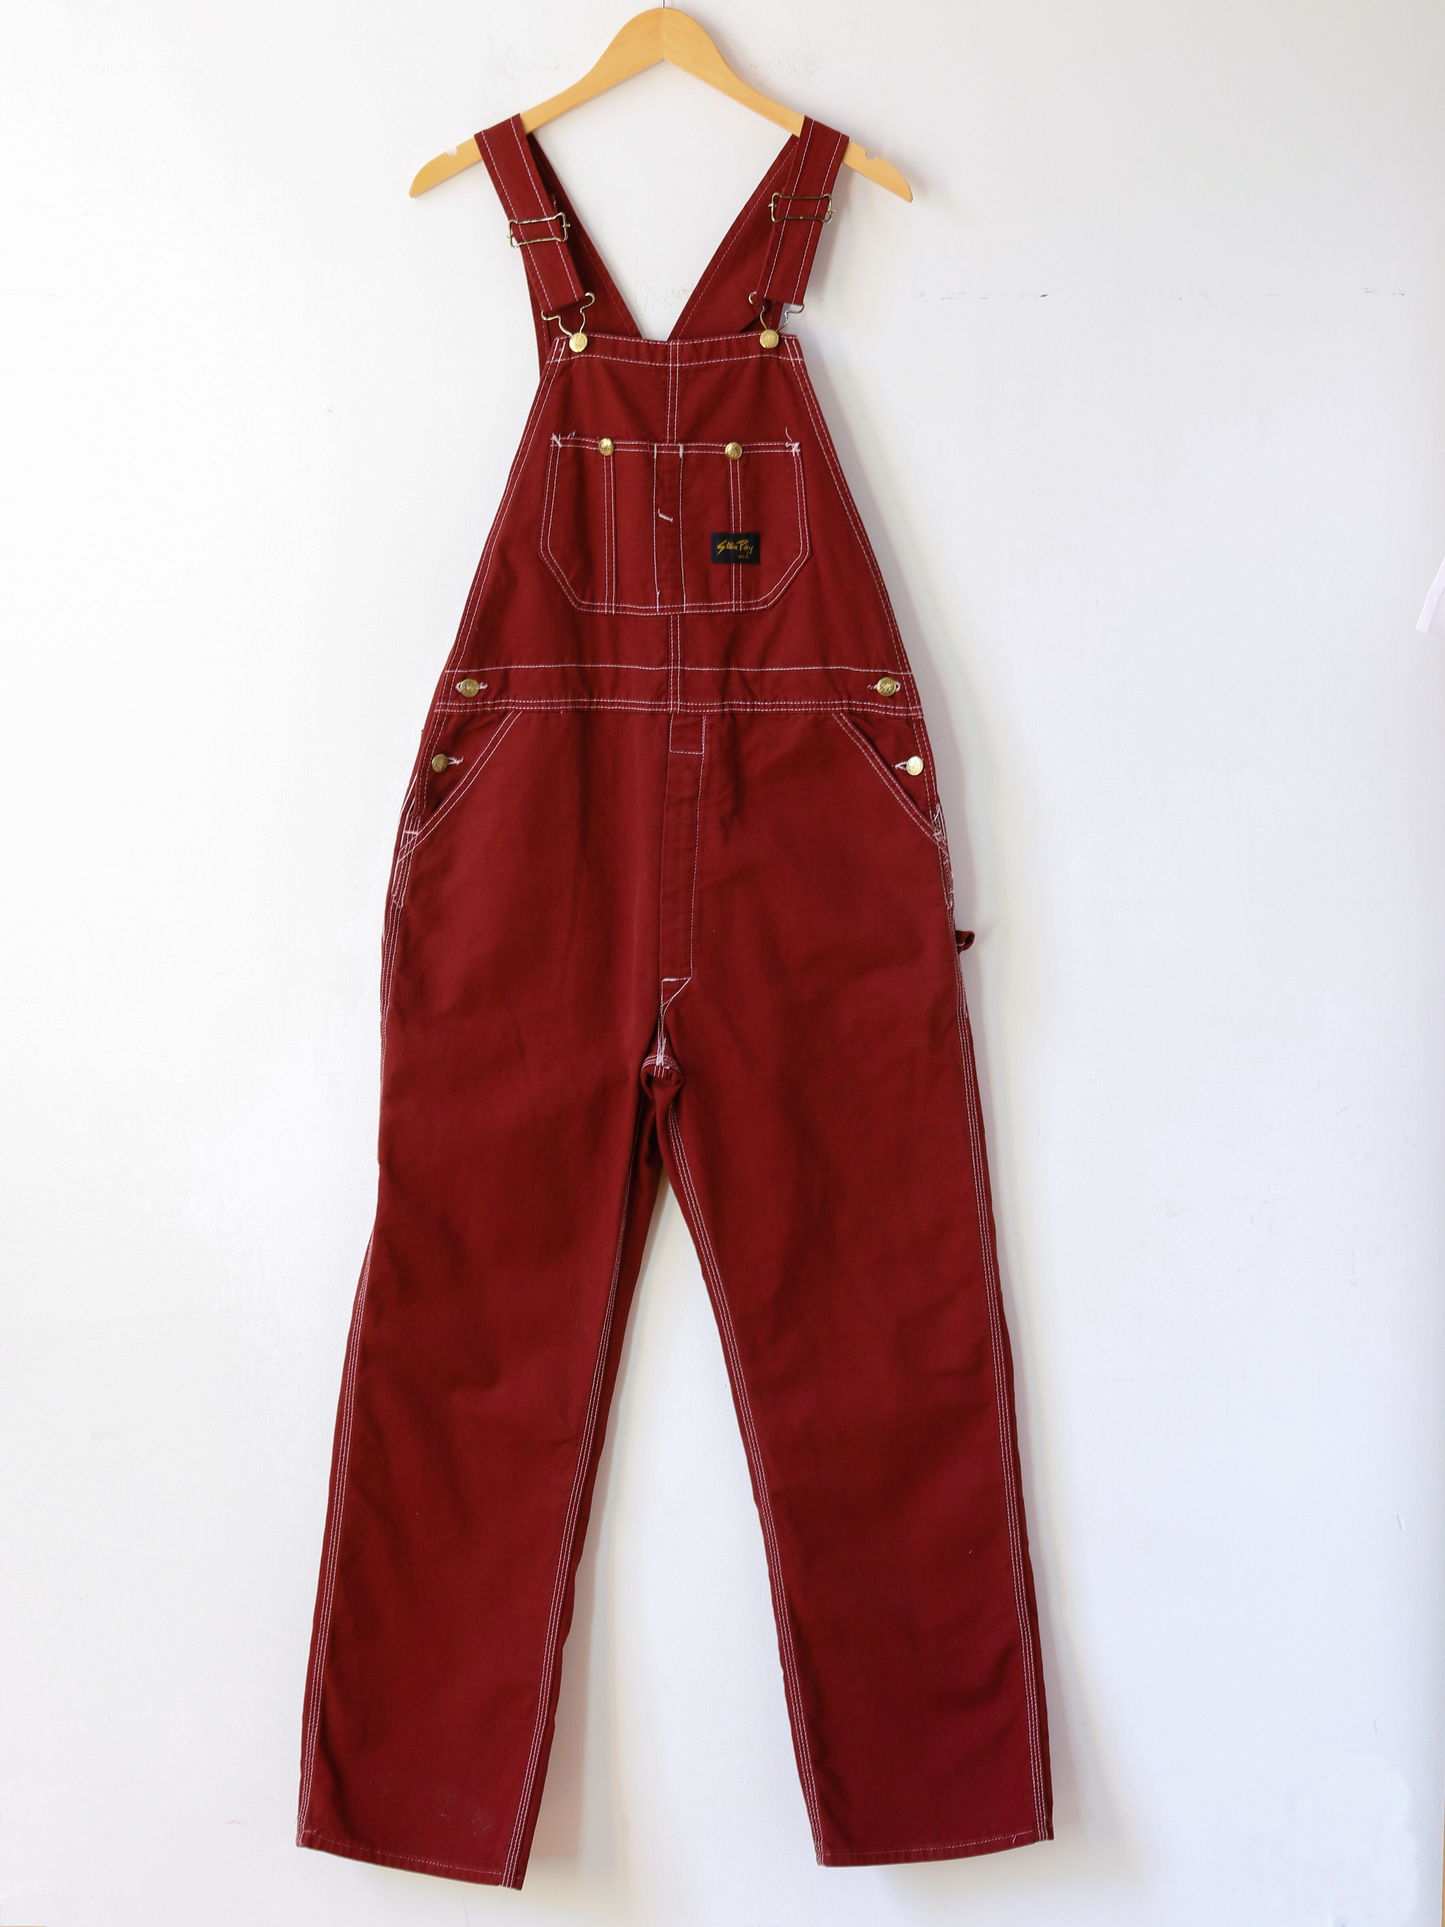 Vintage Deadstock Stan Ray Overalls in Maroon (Multiple Sizes)